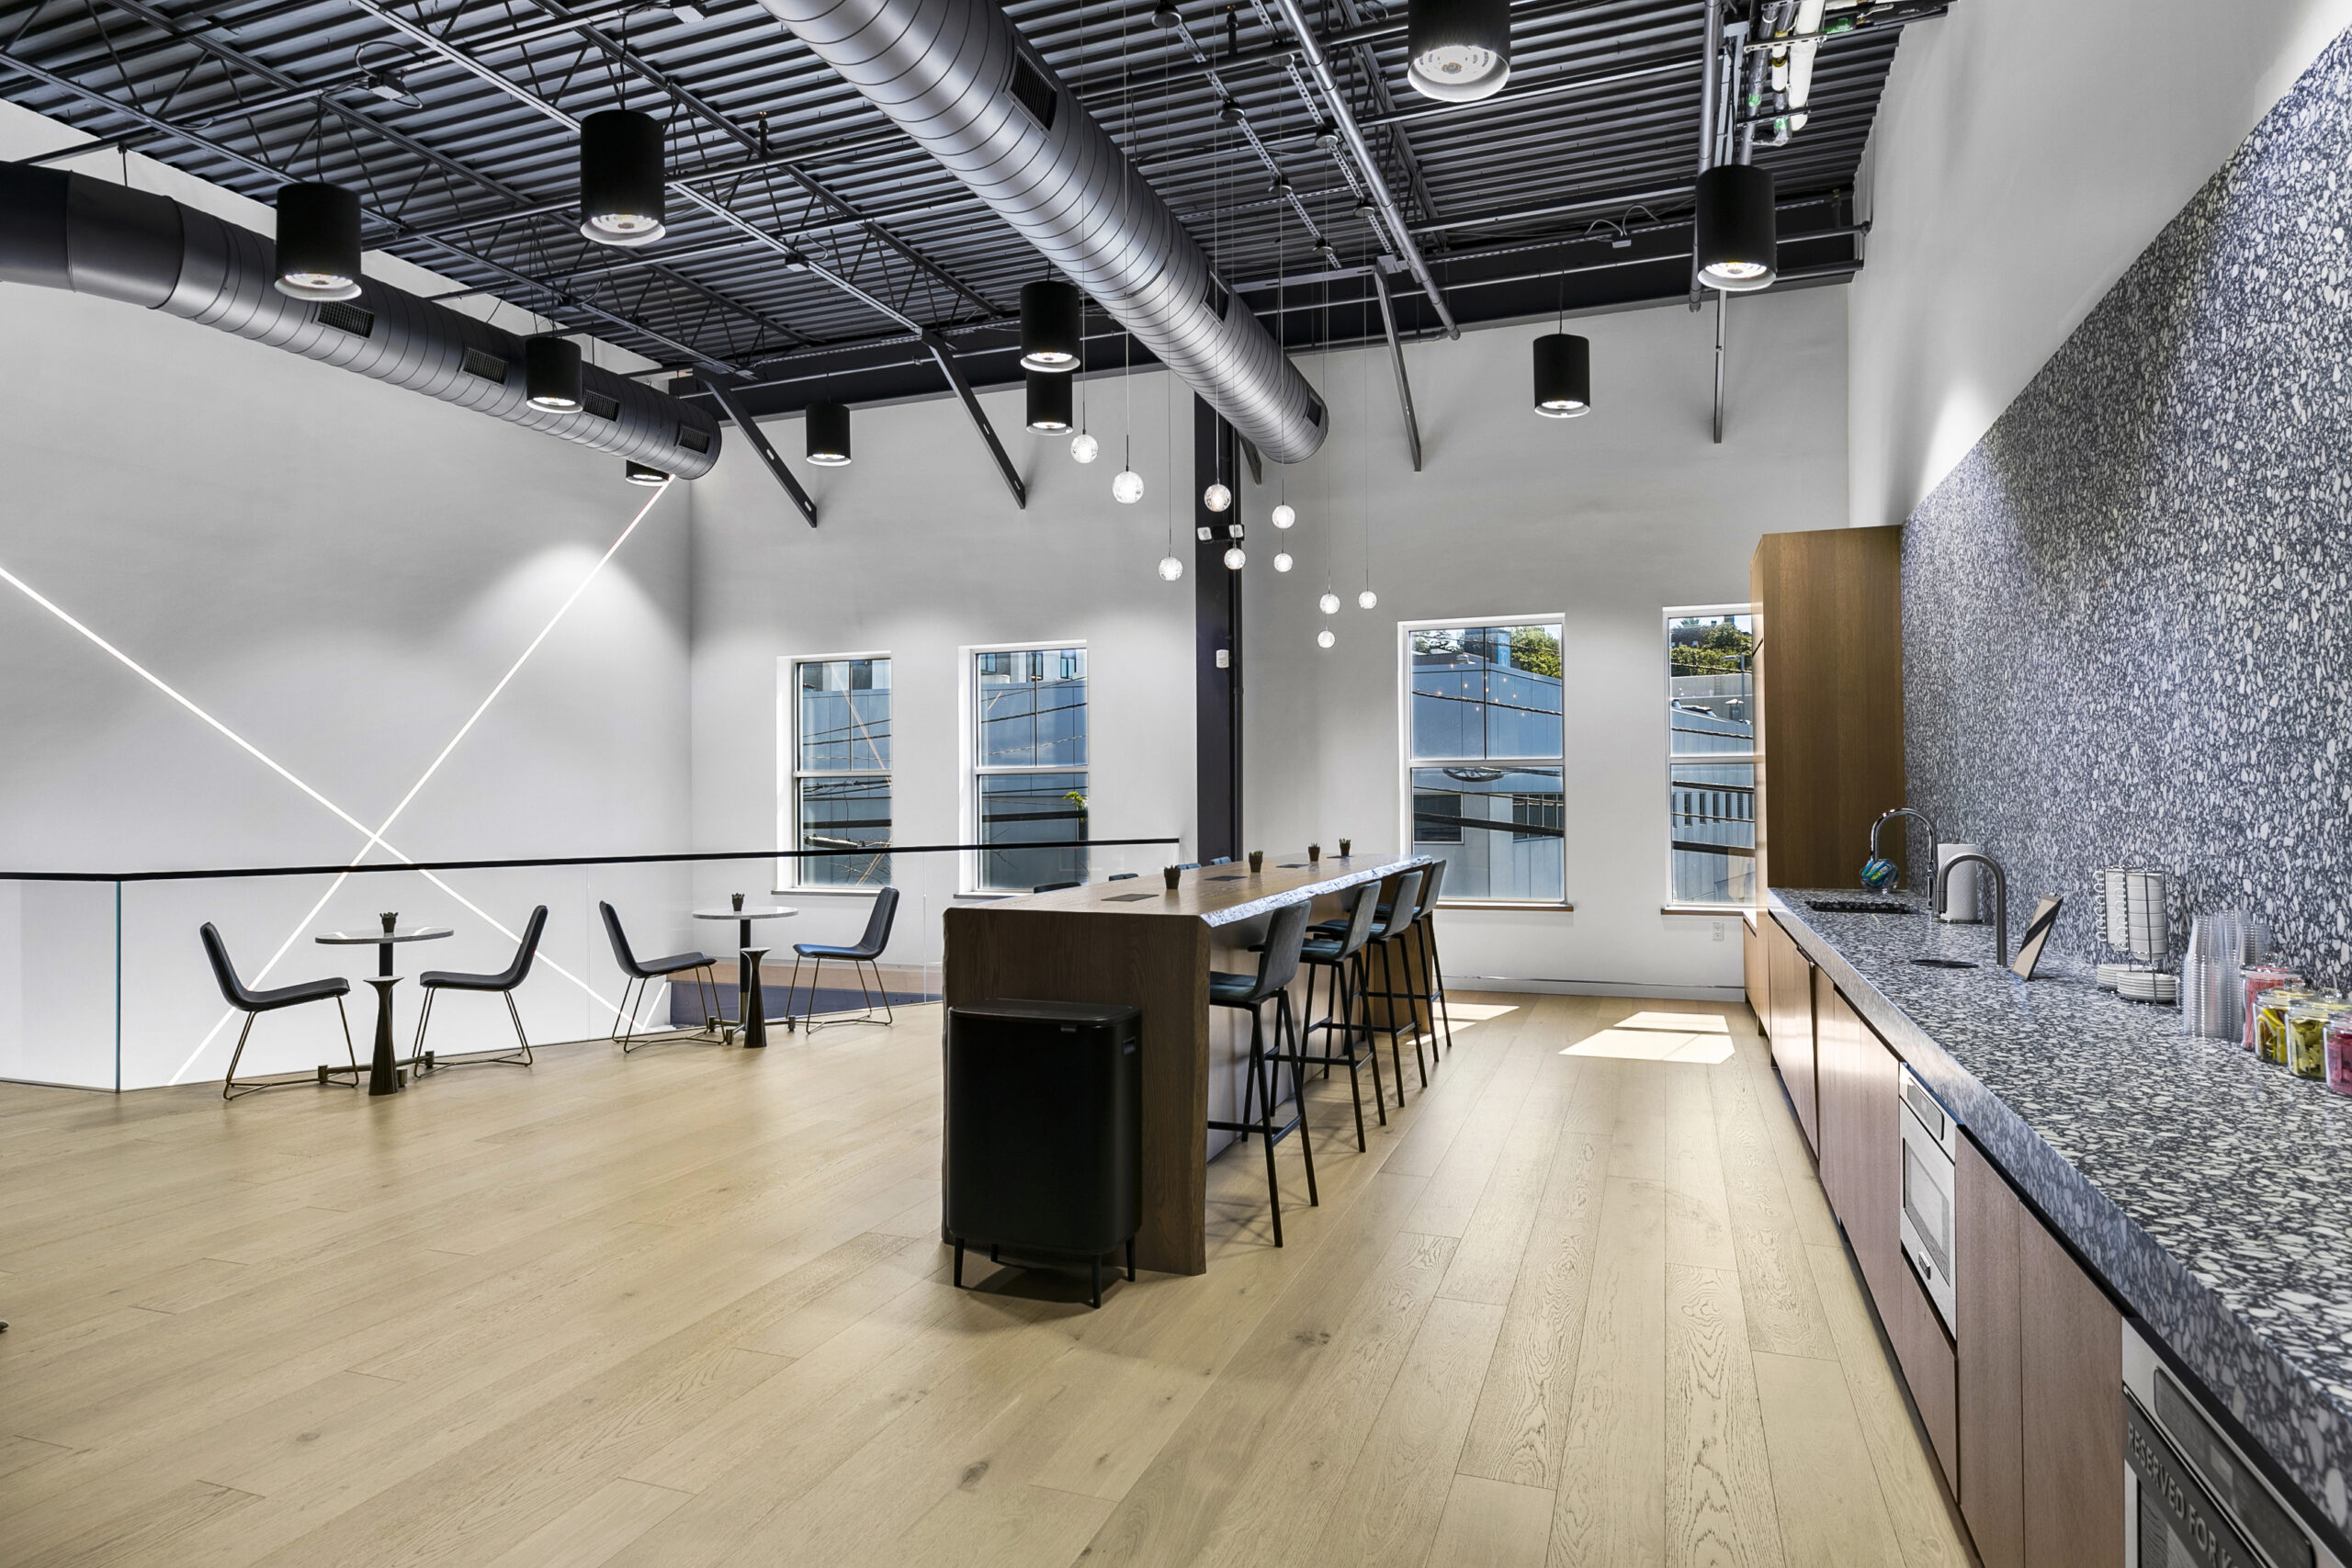 Filamento lights used for high ceiling office space, Dean Street - KABR Group, located in Englewood, New Jersey, increasing LED output, reducing glare, and increasing efficiency.